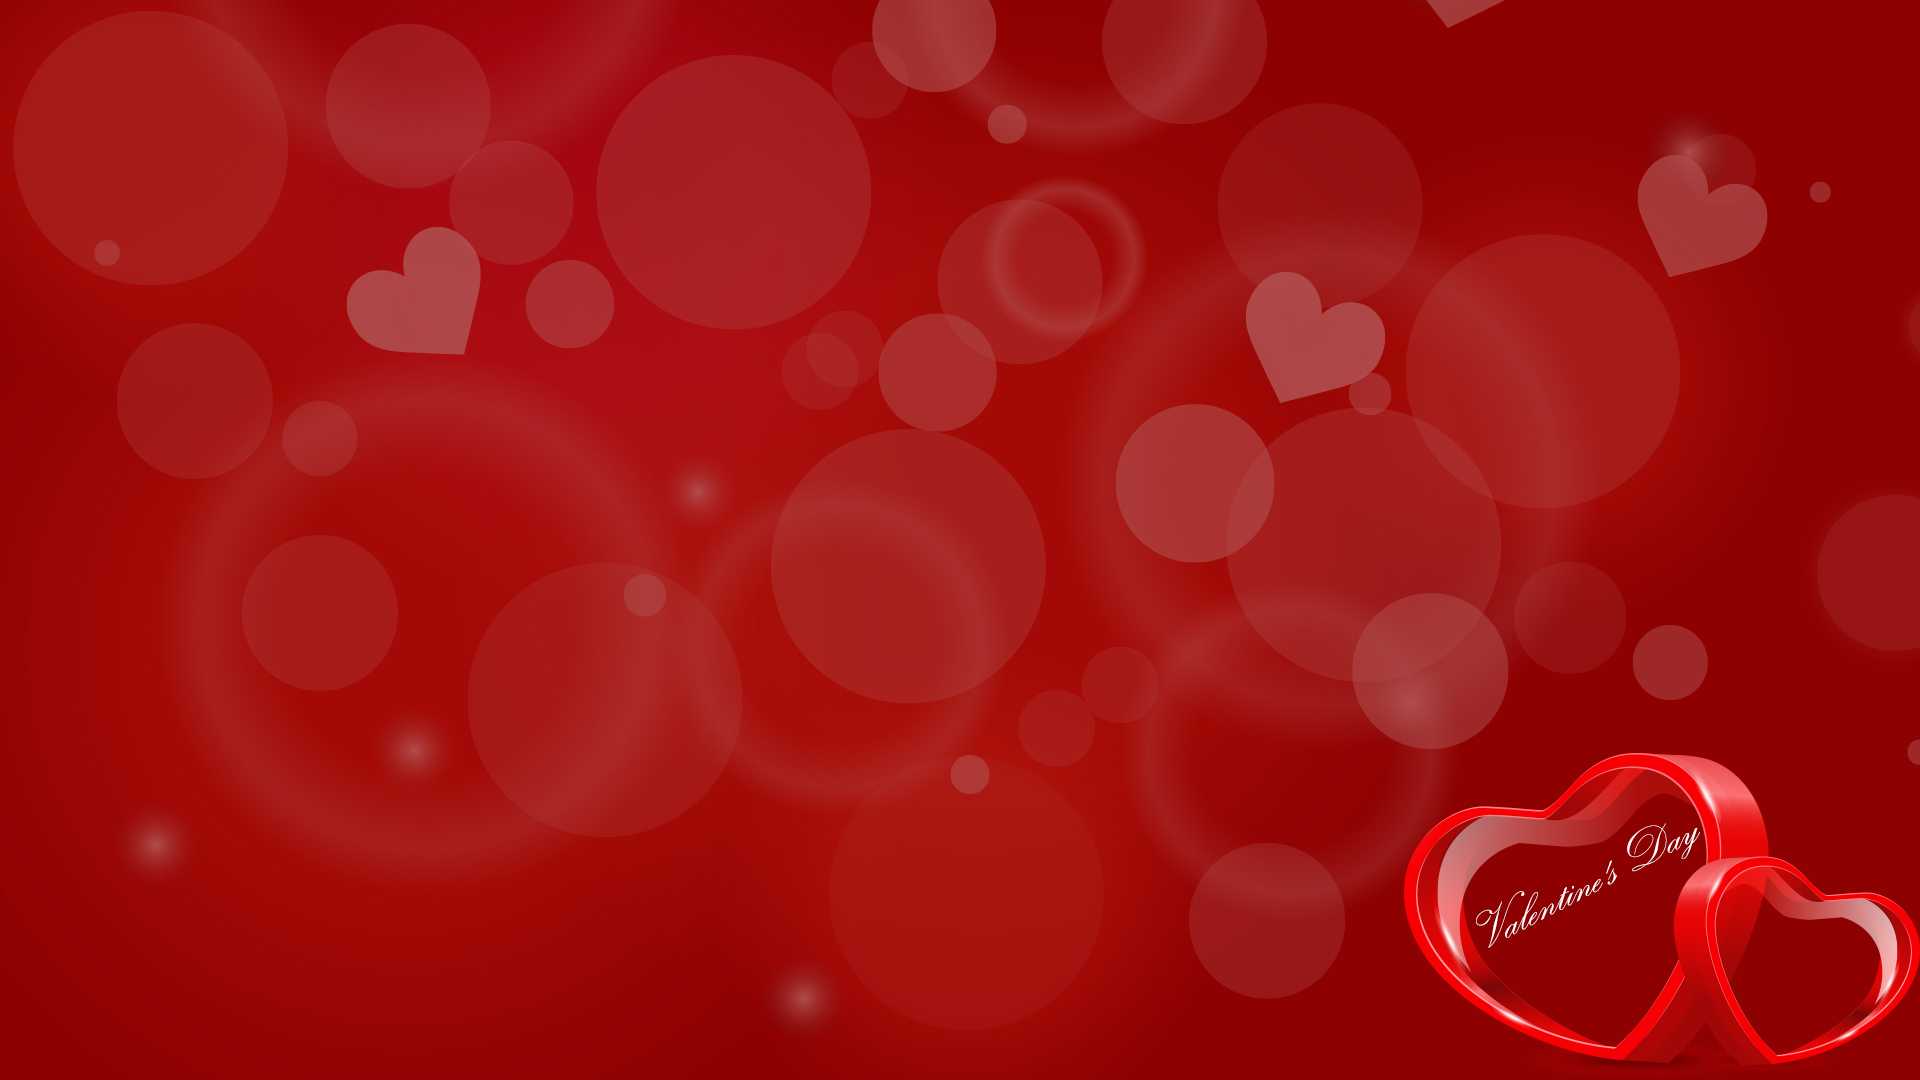 Valentines Day Heart Backgrounds For Powerpoint – Love Ppt Inside Valentine Powerpoint Templates Free